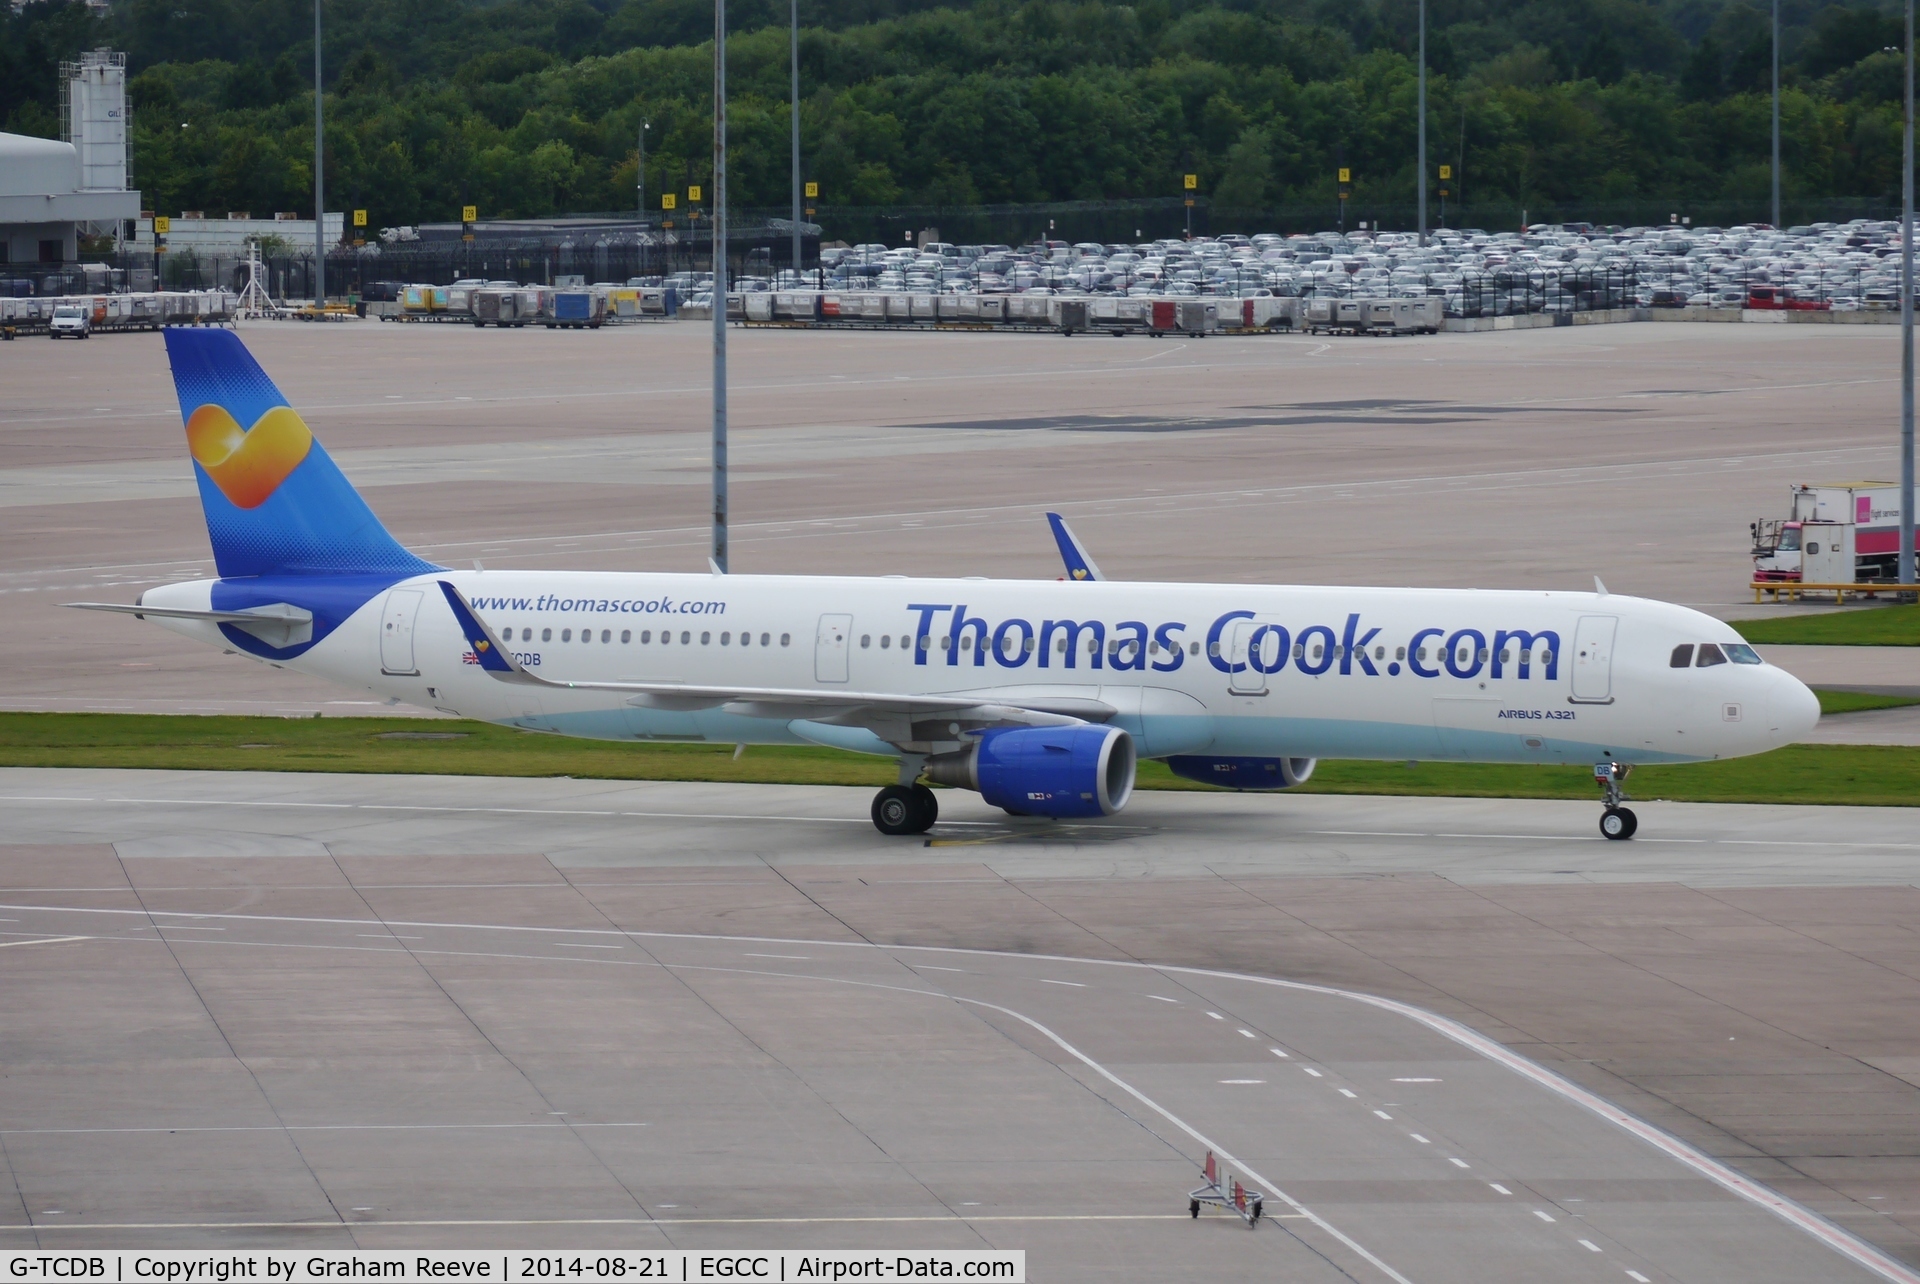 G-TCDB, 2013 Airbus A321-211 C/N 5603, Just arrived at Manchester.